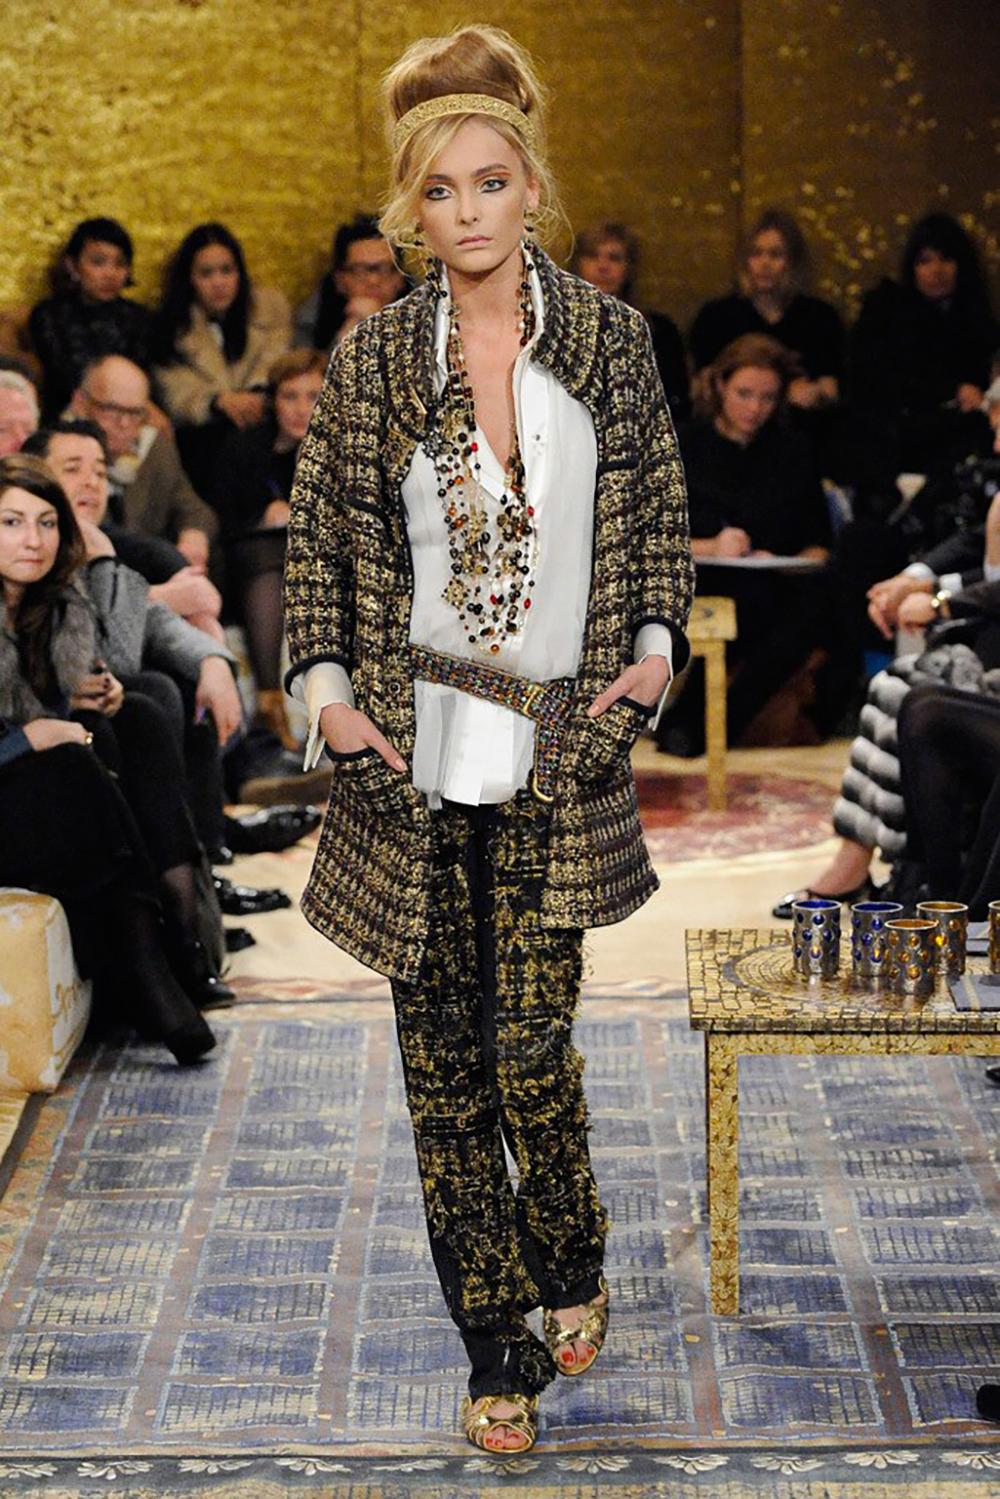 Very famous Chanel coat from Runway of Paris / BYZANCE Metiers d'Art Collection, 2011 Pre-Fall by Karl Lagerfeld.  Retail price ca. 10,000$ 
 Size mark 38 FR.  Condition: pristine, no signs of wear
 As seen Aurdrey Tautou and many other celebs and